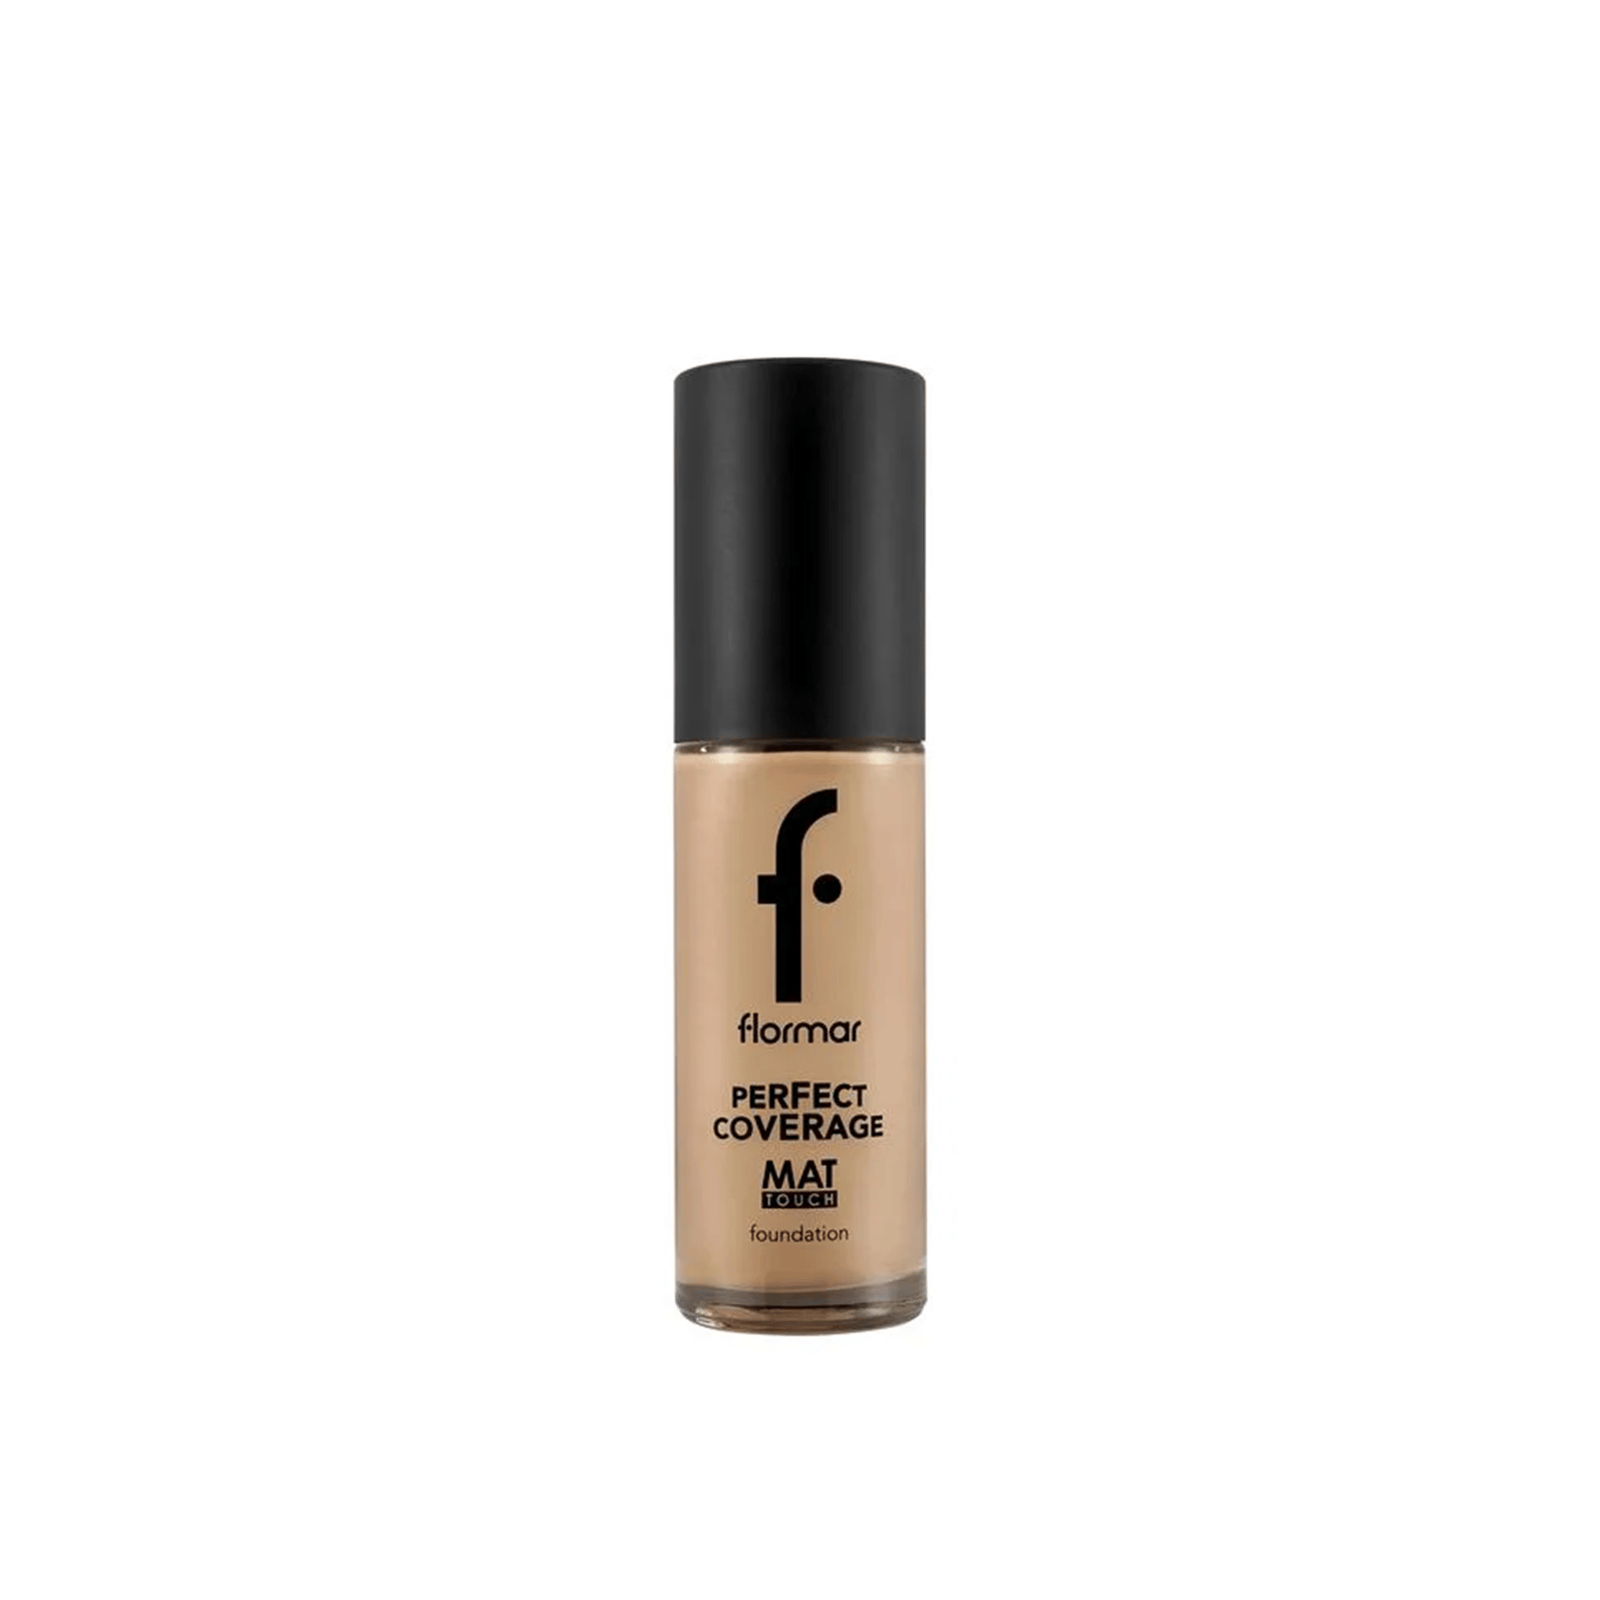 Flormar Perfect Coverage Mat Touch Foundation 313 Medium Beige 30ml